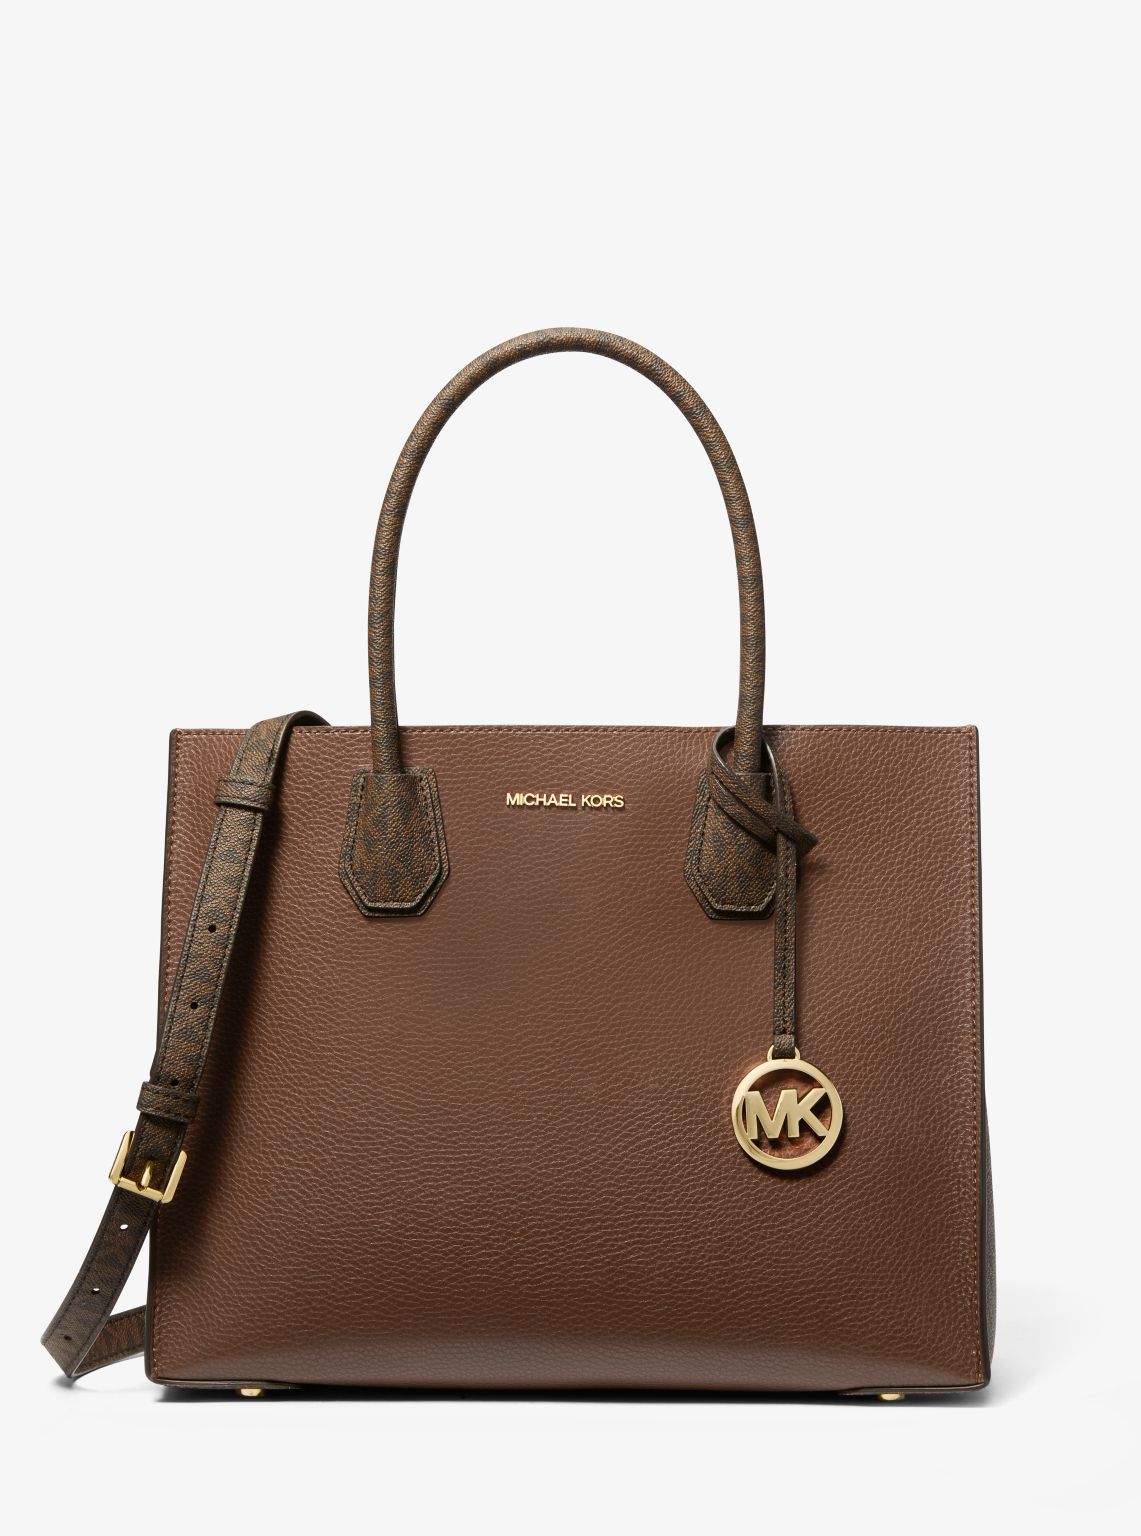 Michael Kors sale: Shop tote bags, purses and more for under $100